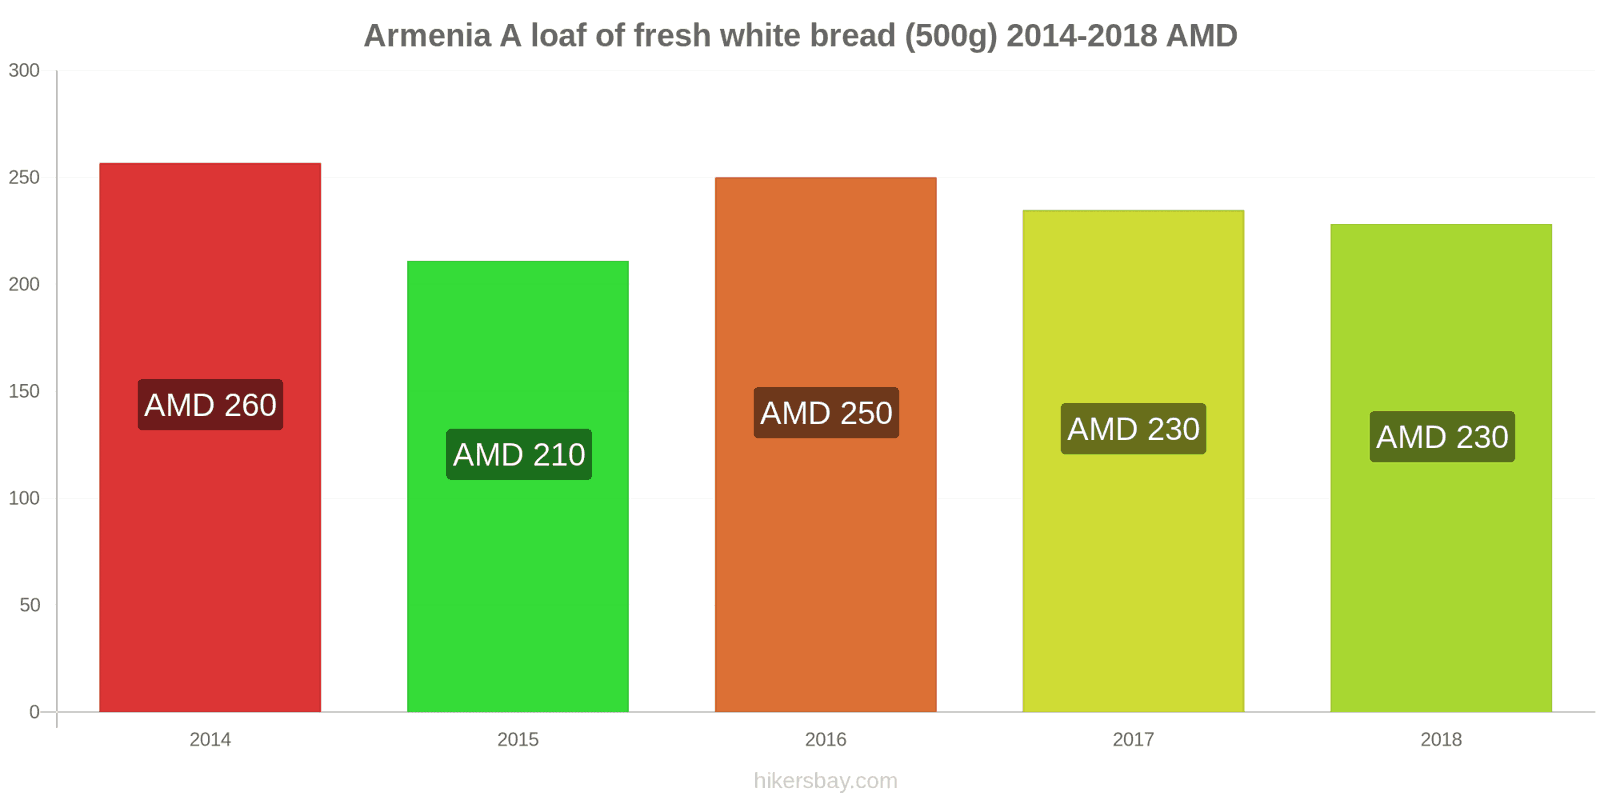 Armenia price changes A loaf of fresh white bread (500g) hikersbay.com